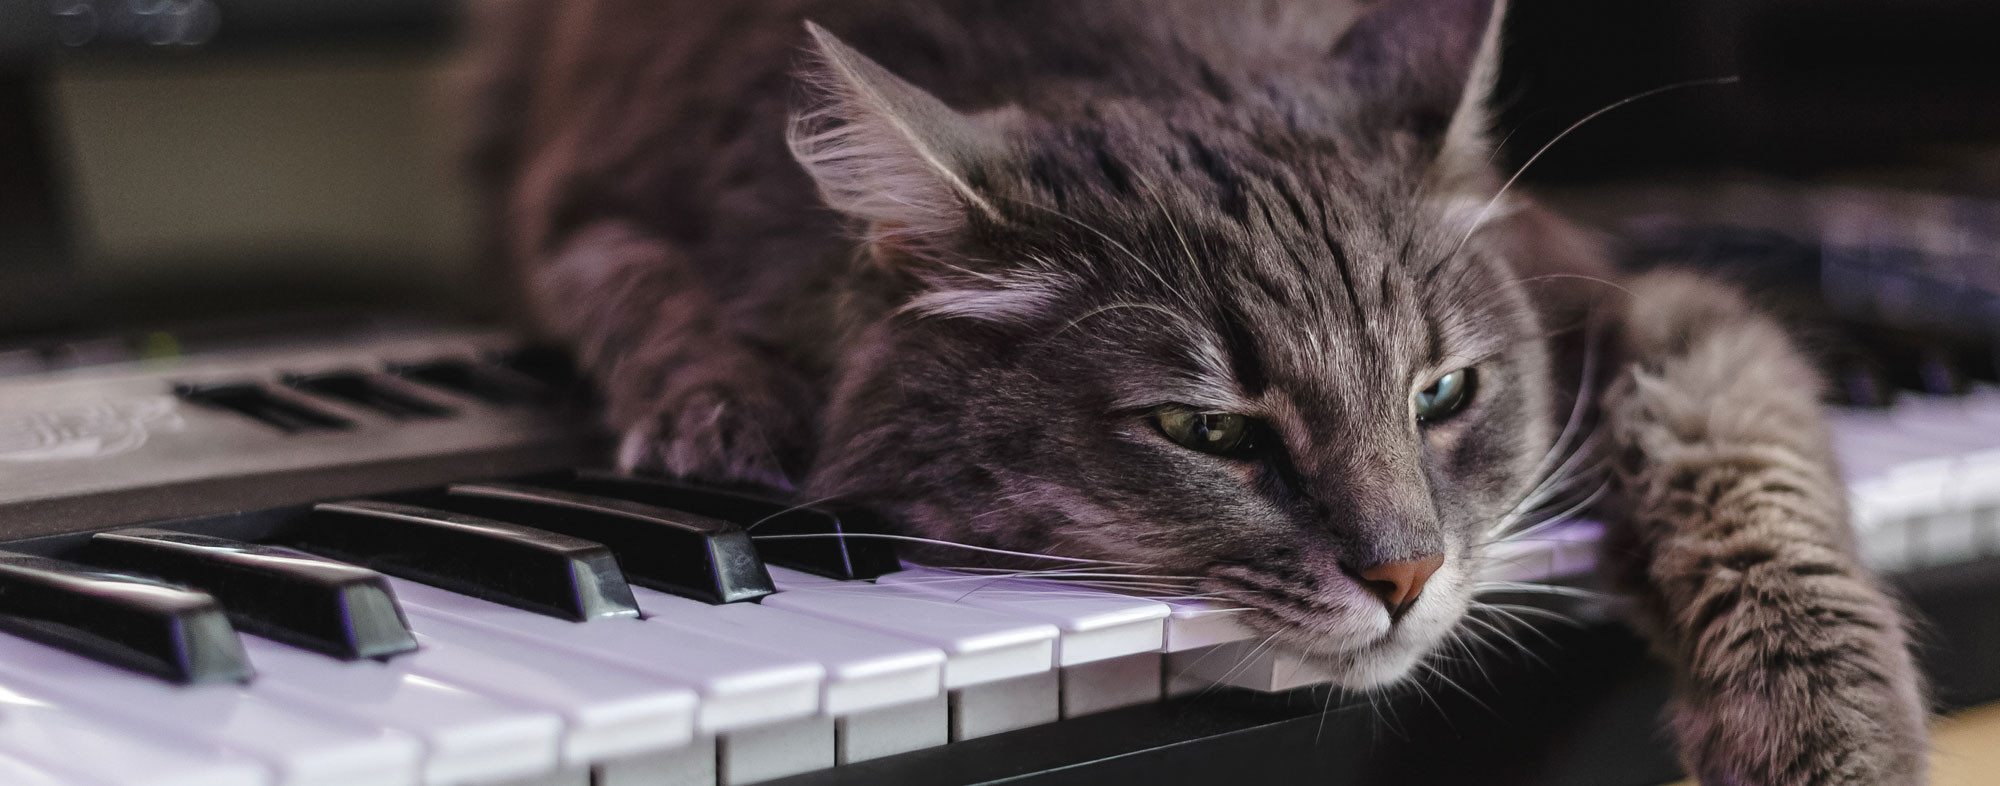 While your cat plays with its toys, why not add a soundtrack?